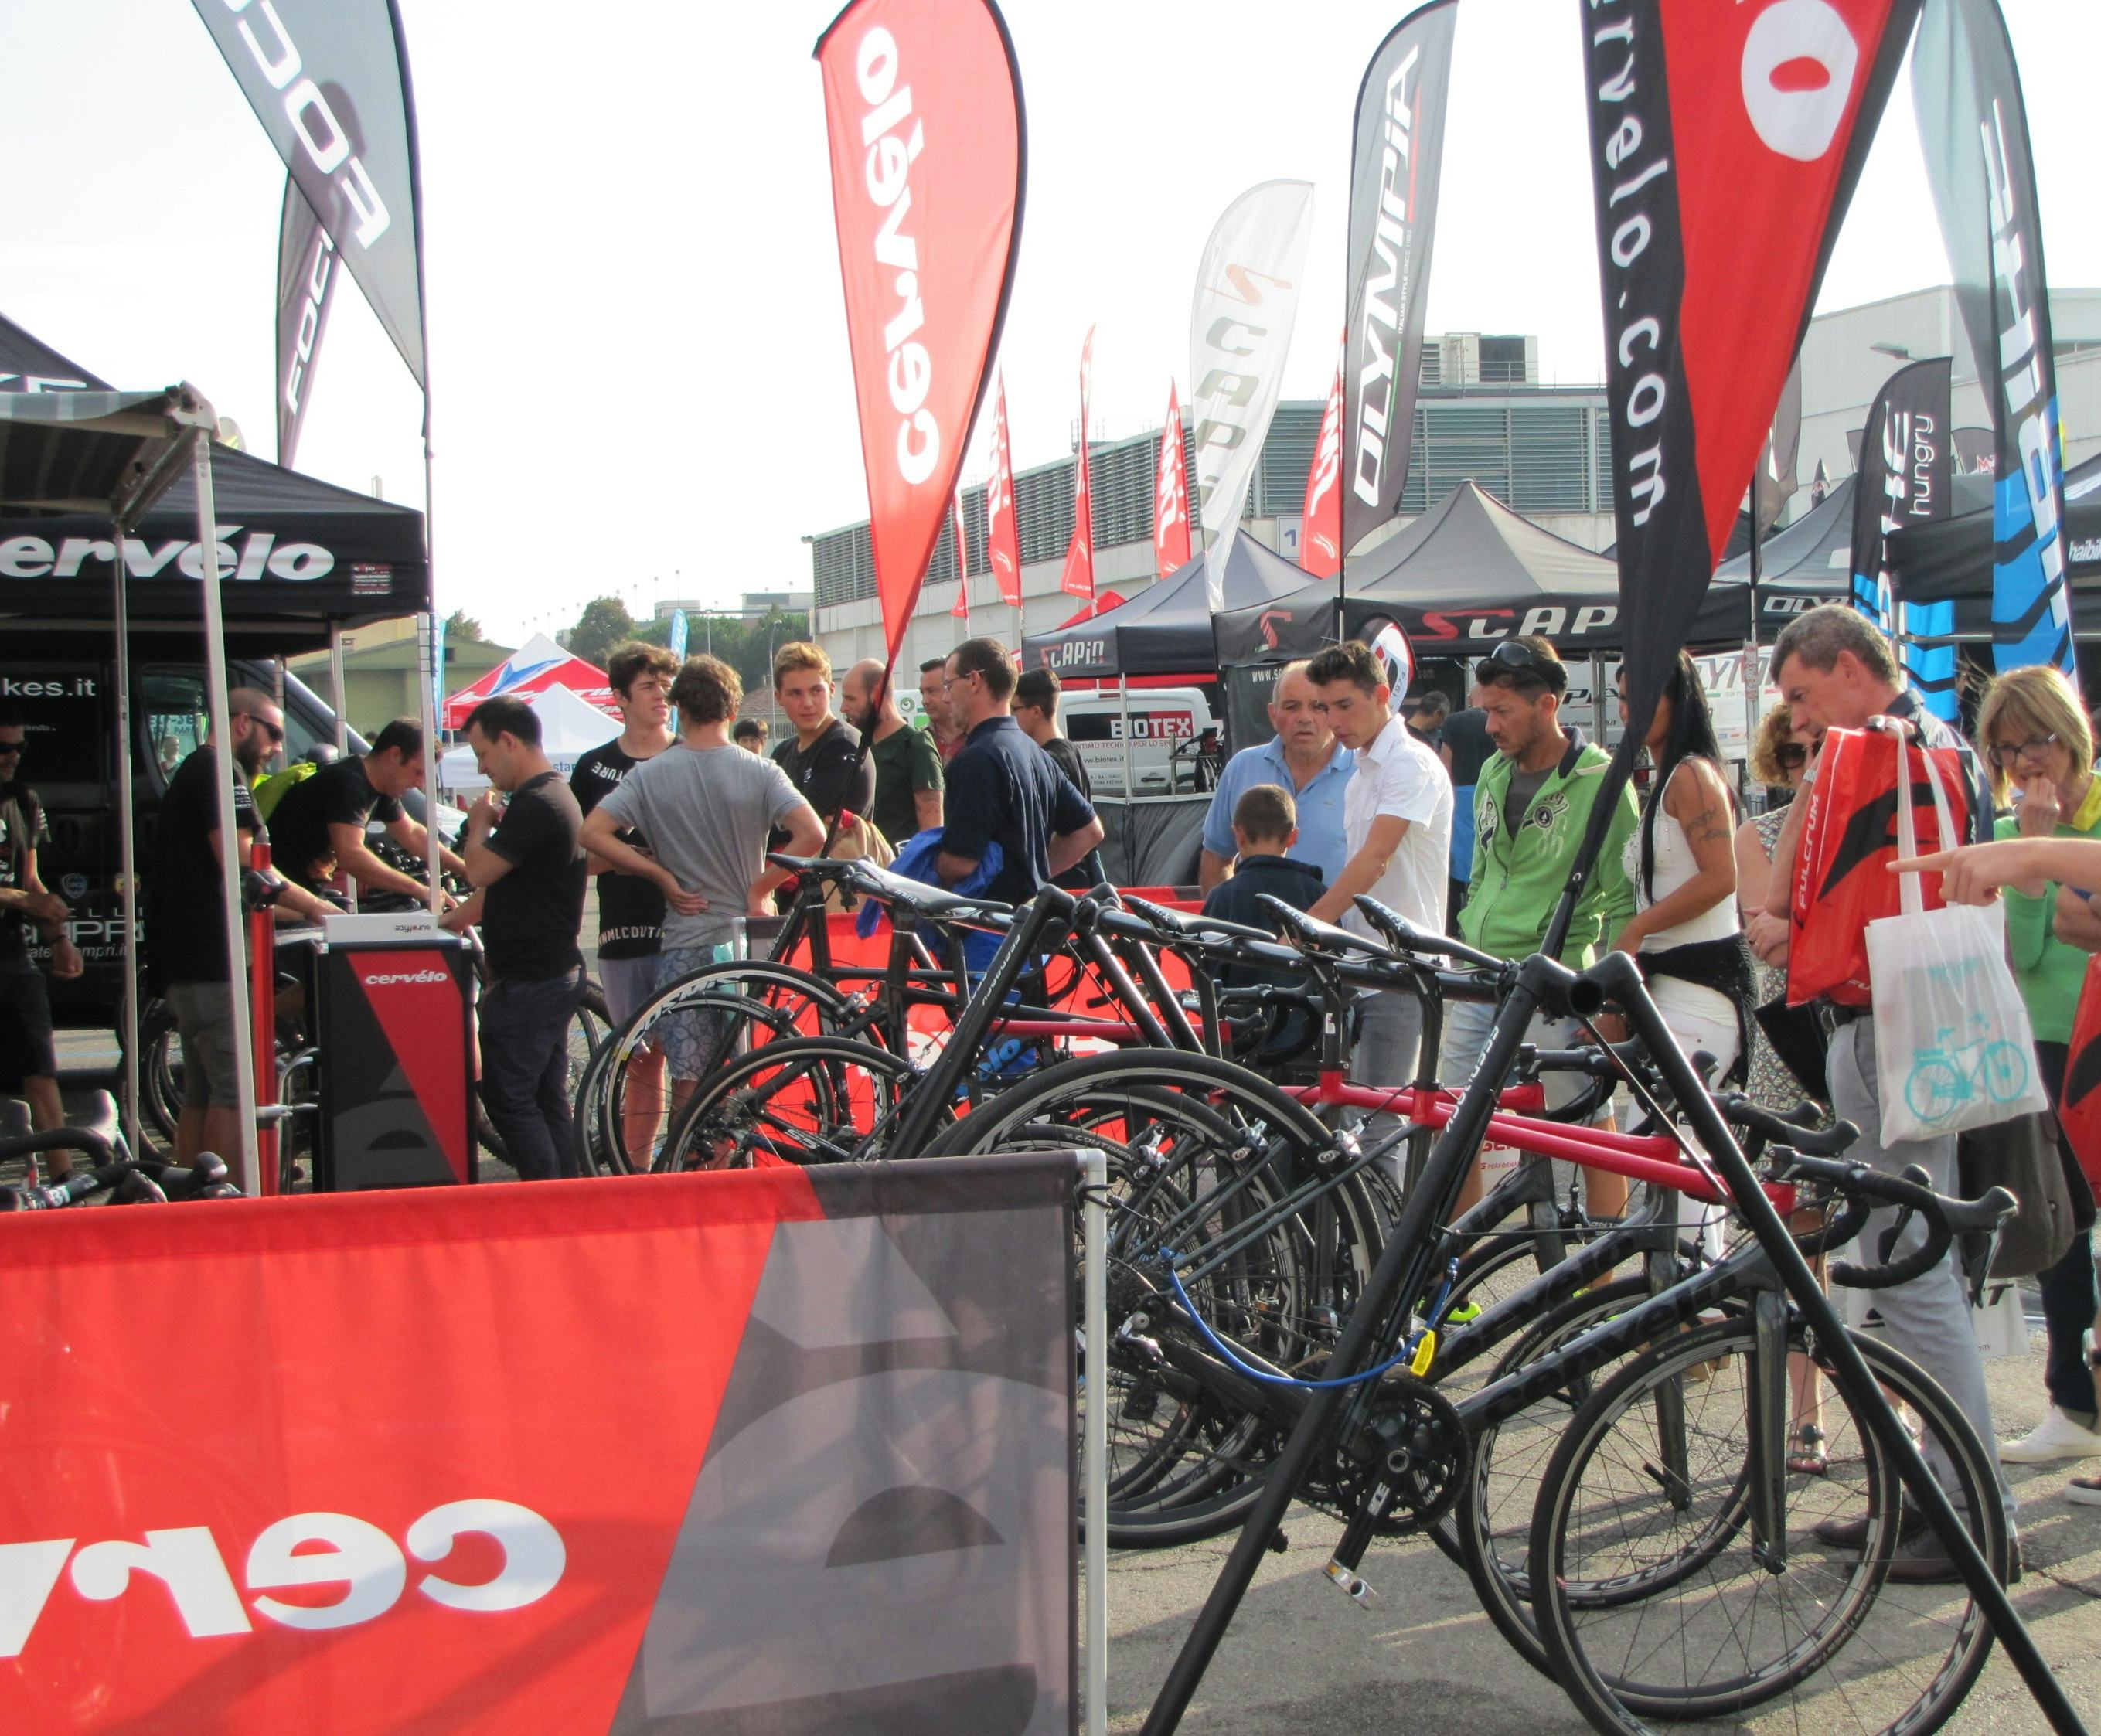 Visitors to CosmoBike 2016 will have the chance to see and feel products and try out new models and innovations for 2017. – Photo Bike Europe